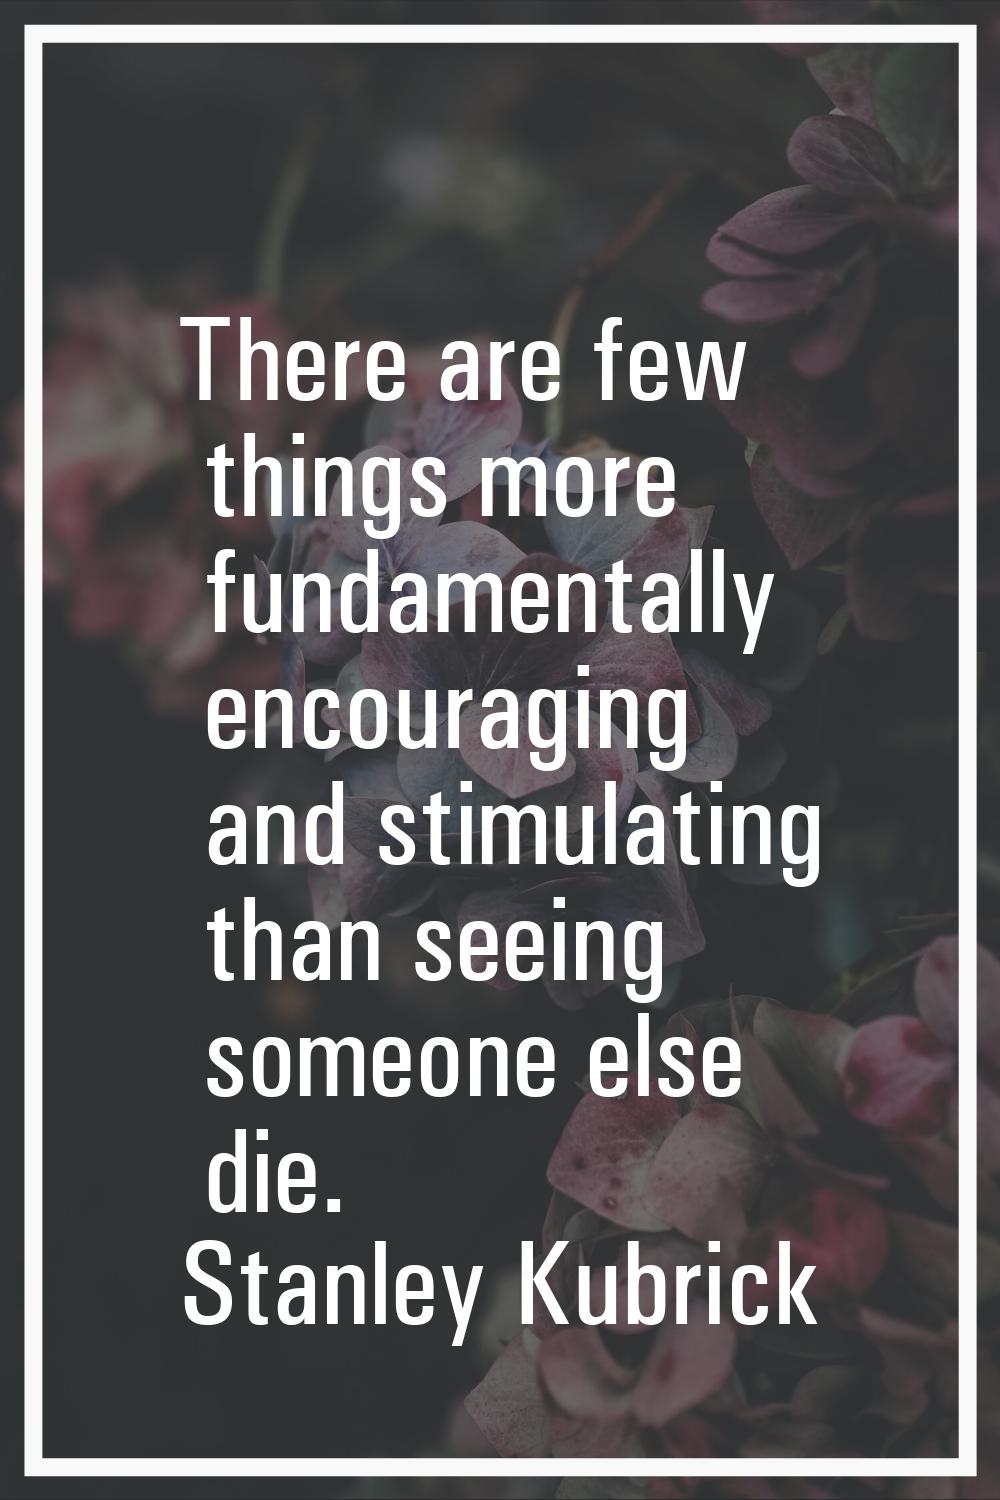 There are few things more fundamentally encouraging and stimulating than seeing someone else die.